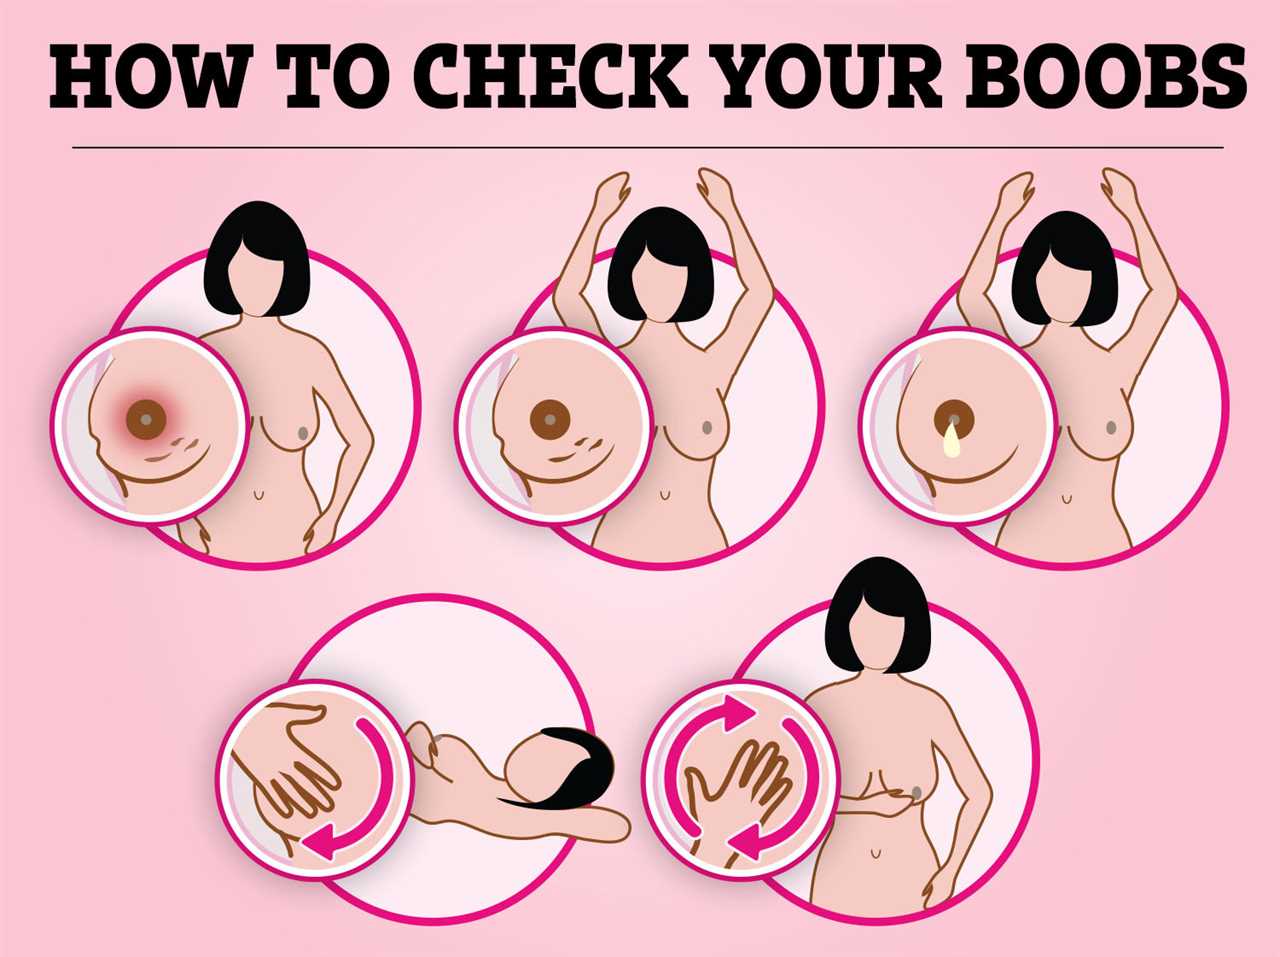 The Essential Guide to DIY Cancer Checks and Early Symptoms